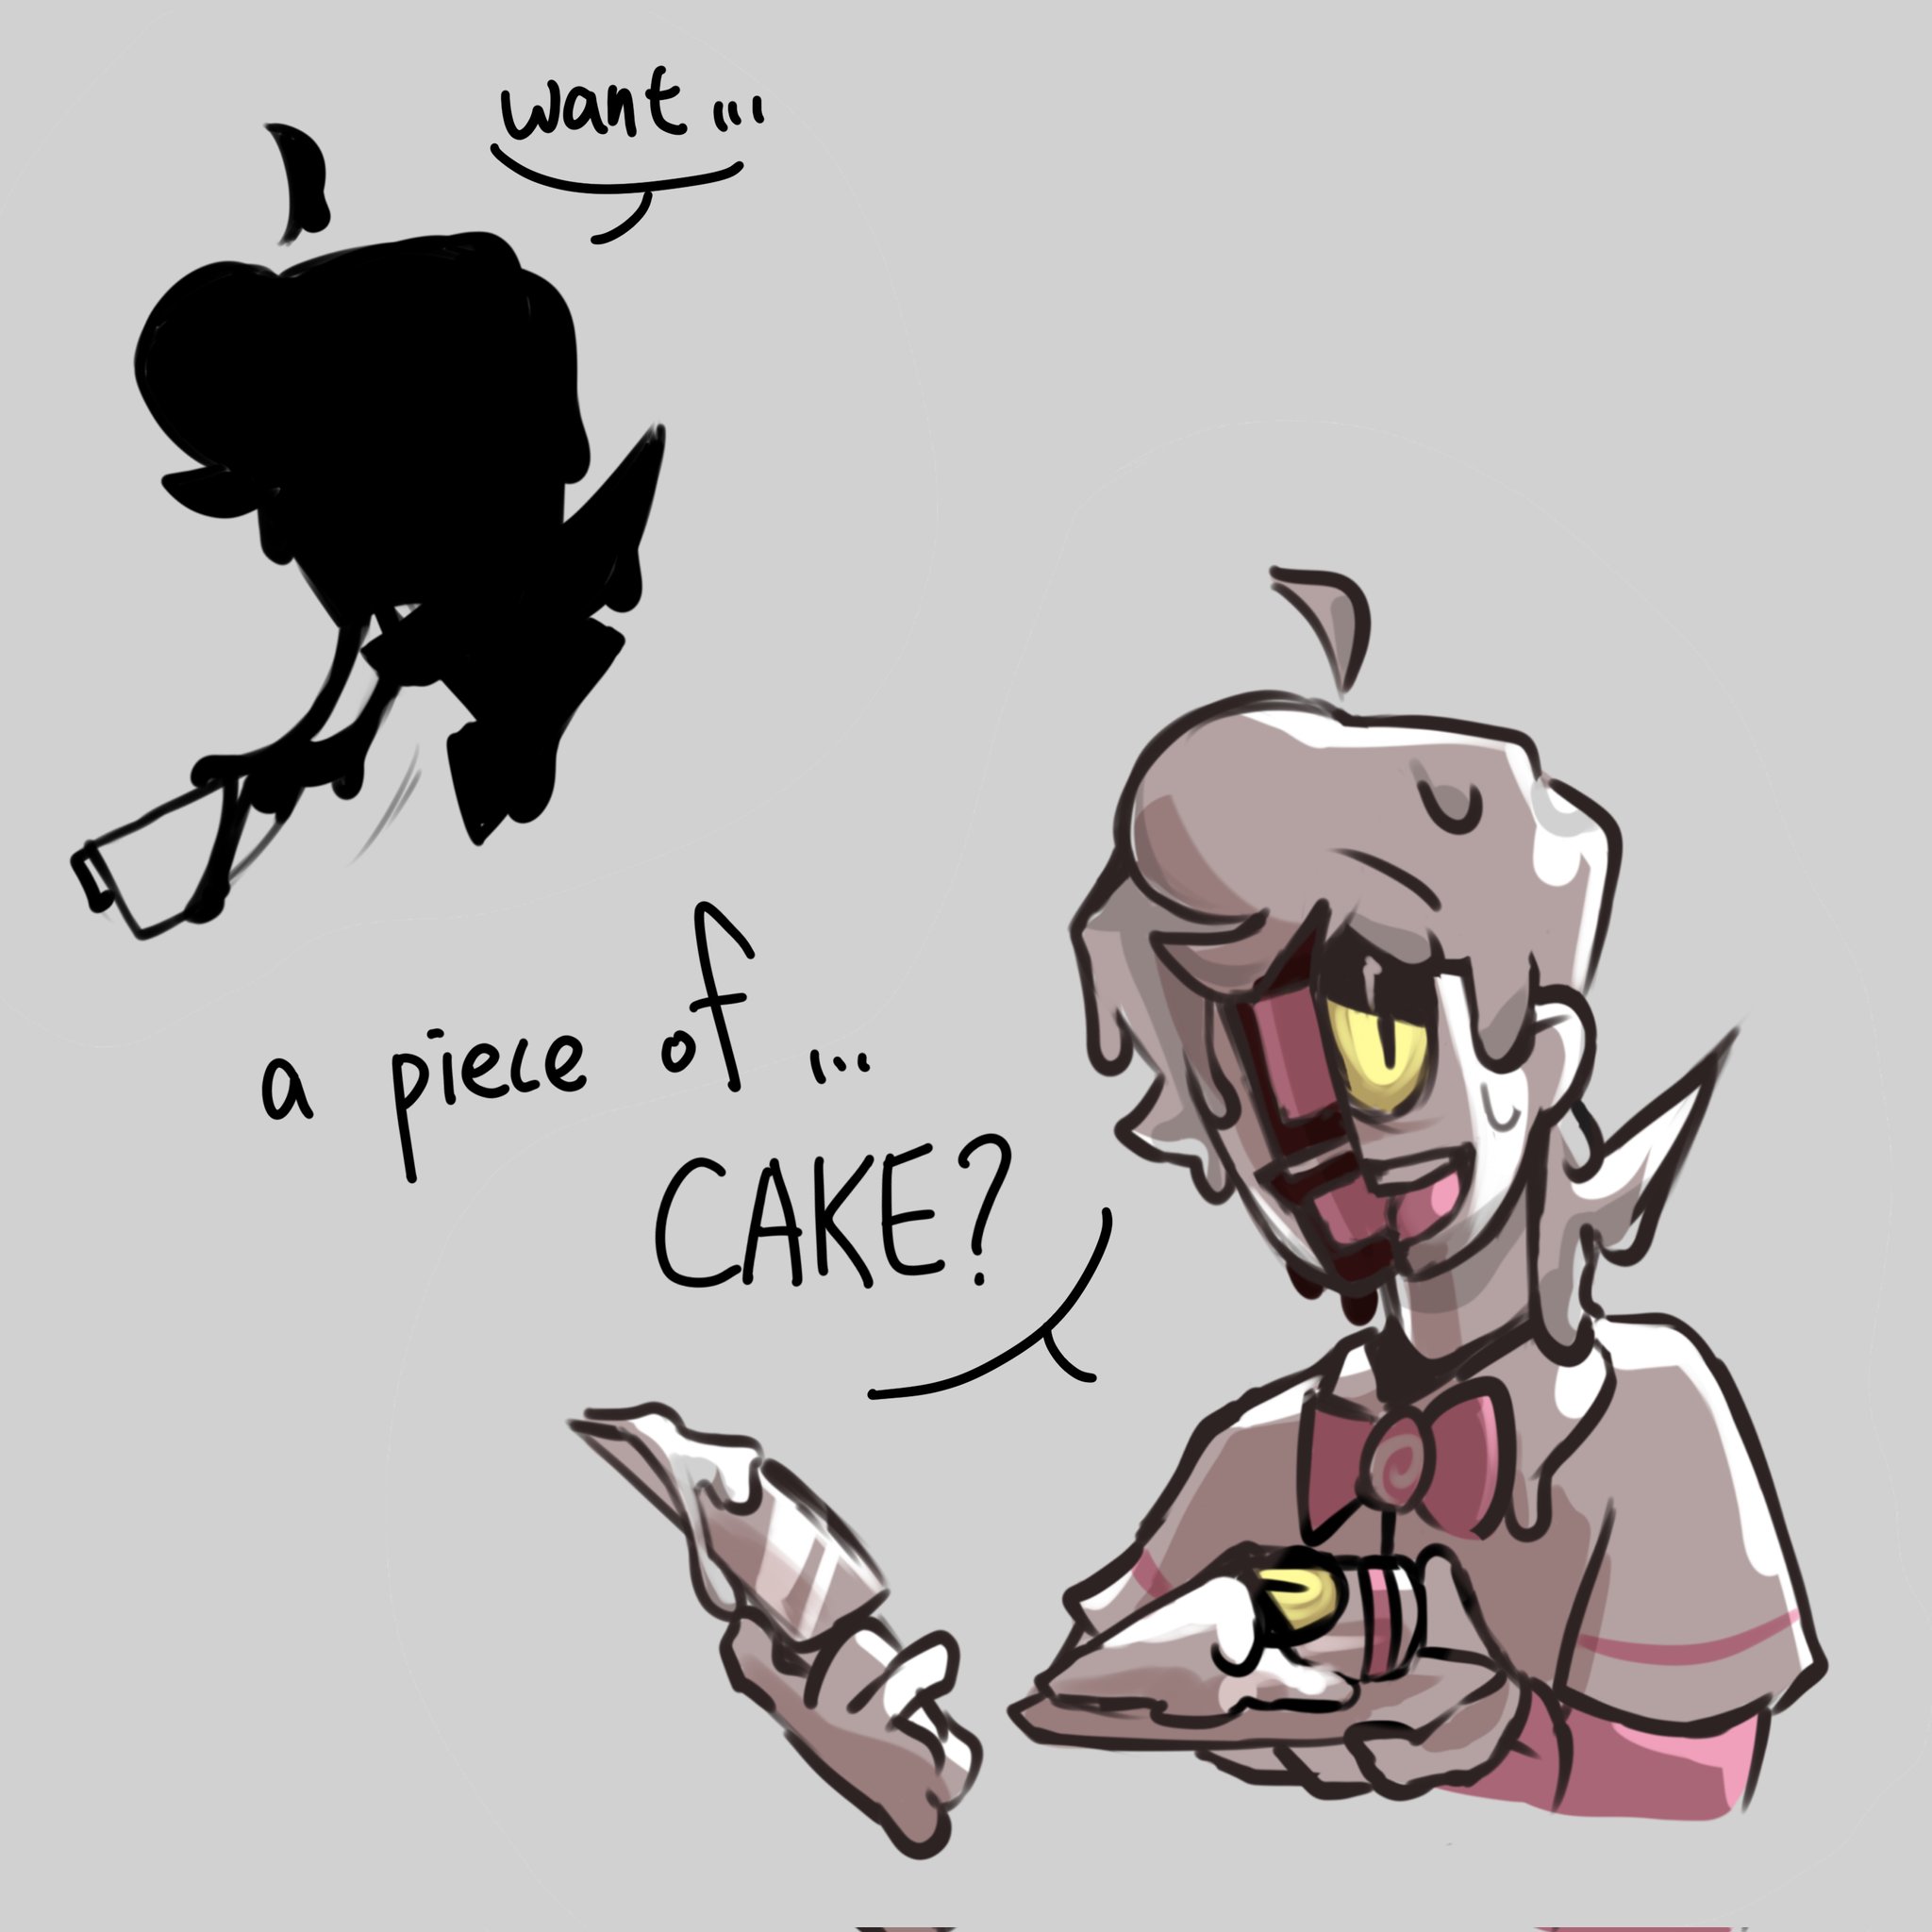 limonad_c (COMS OPEN 0/5) on X: At first I wanted to draw Kevin, but I  know how much you all love Kevin cake *bites him* #spookymonth  #spookymonthfanart #spookymonthkevin #cakekevin #cakevin #kevinxstreber  #candybats #